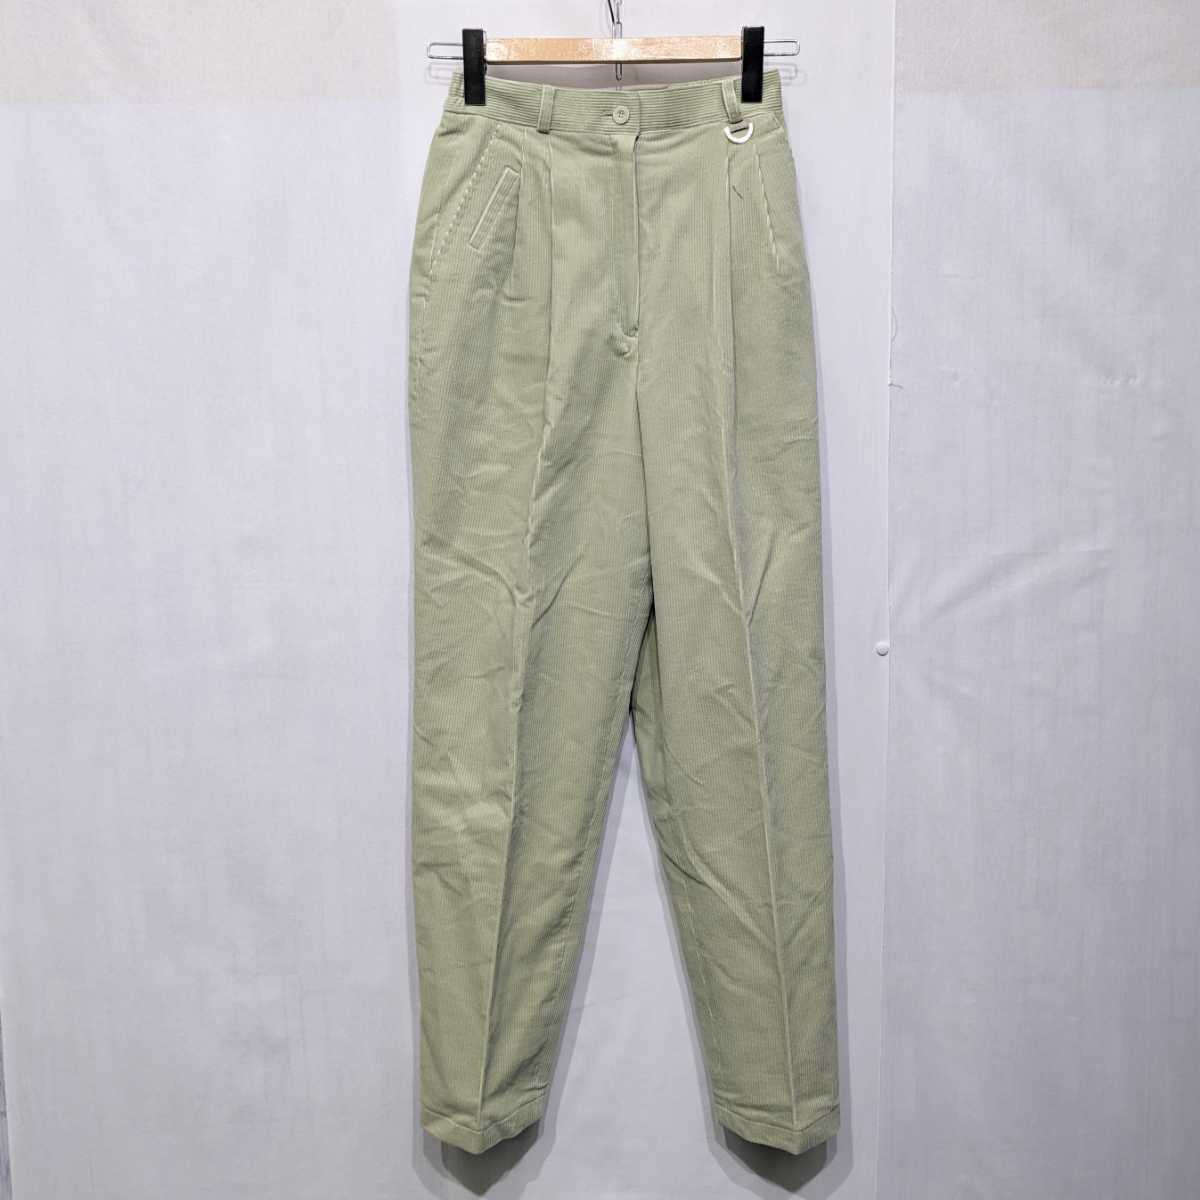  unused goods Christian Dior SPORTS Christian Dior sport corduroy tapered pants tuck pants Vintage Old 